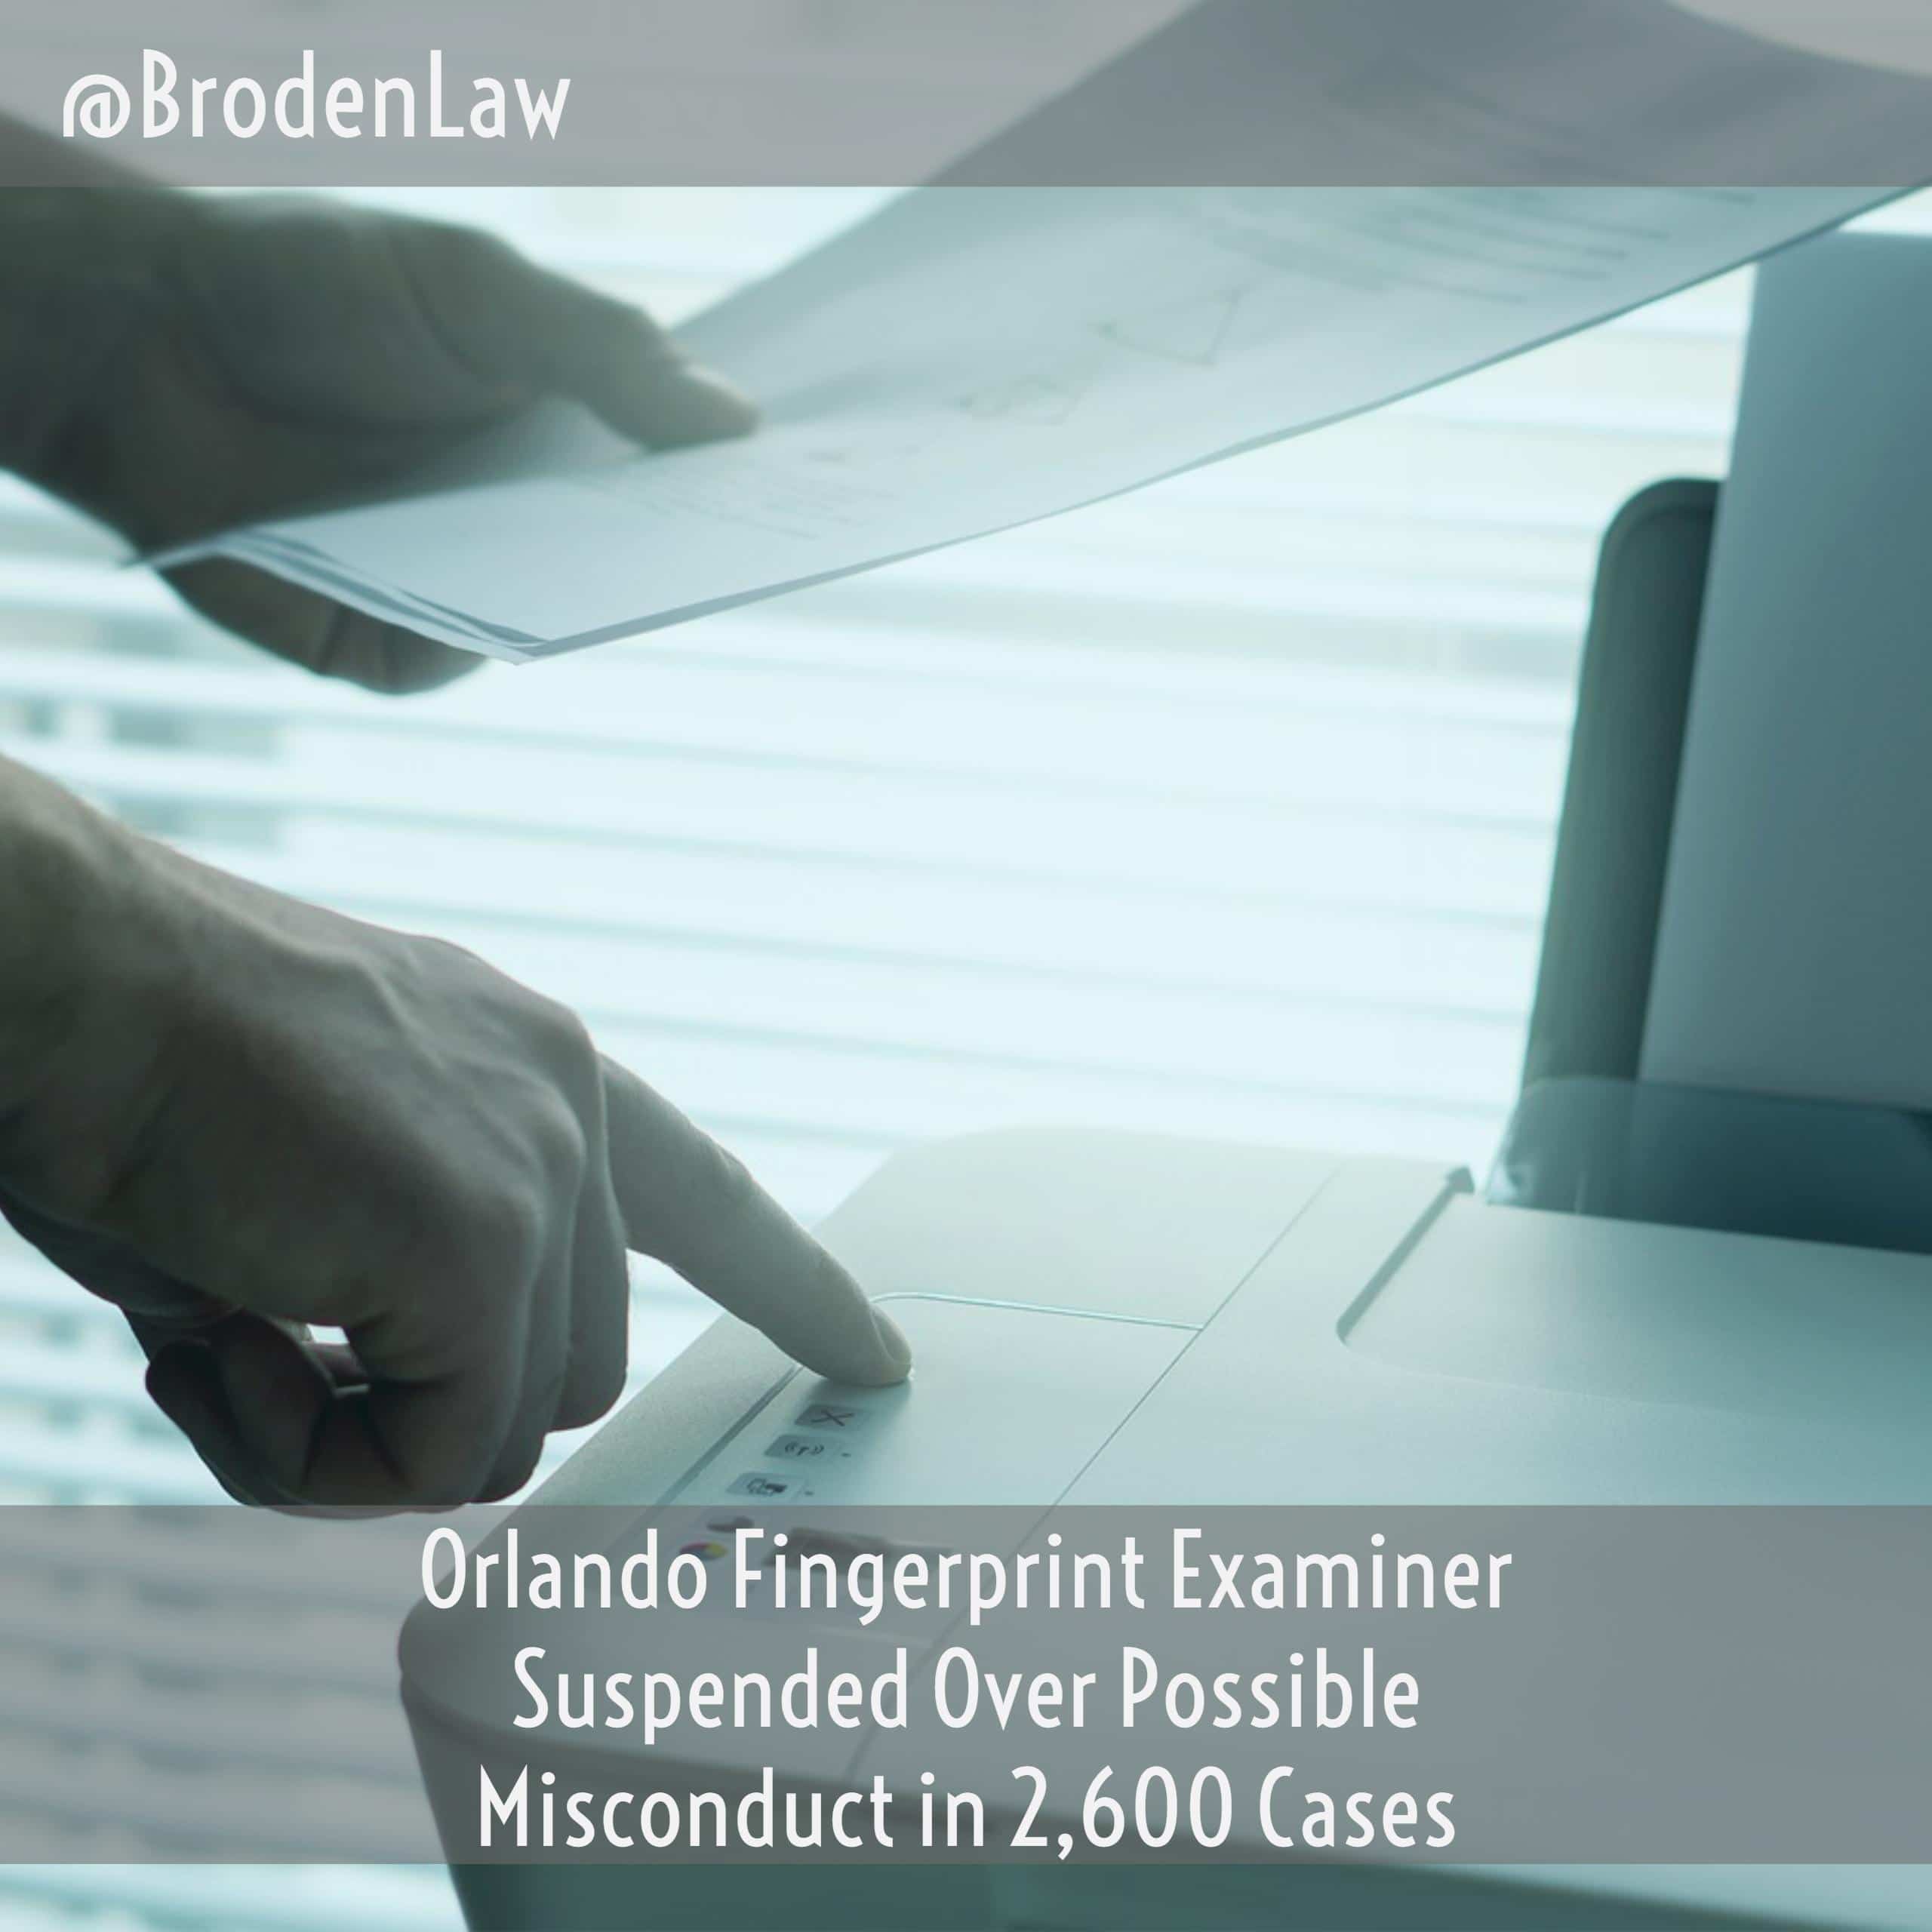 Orlando Fingerprint Examiner Suspended Over Possible Misconduct in 2600 Cases